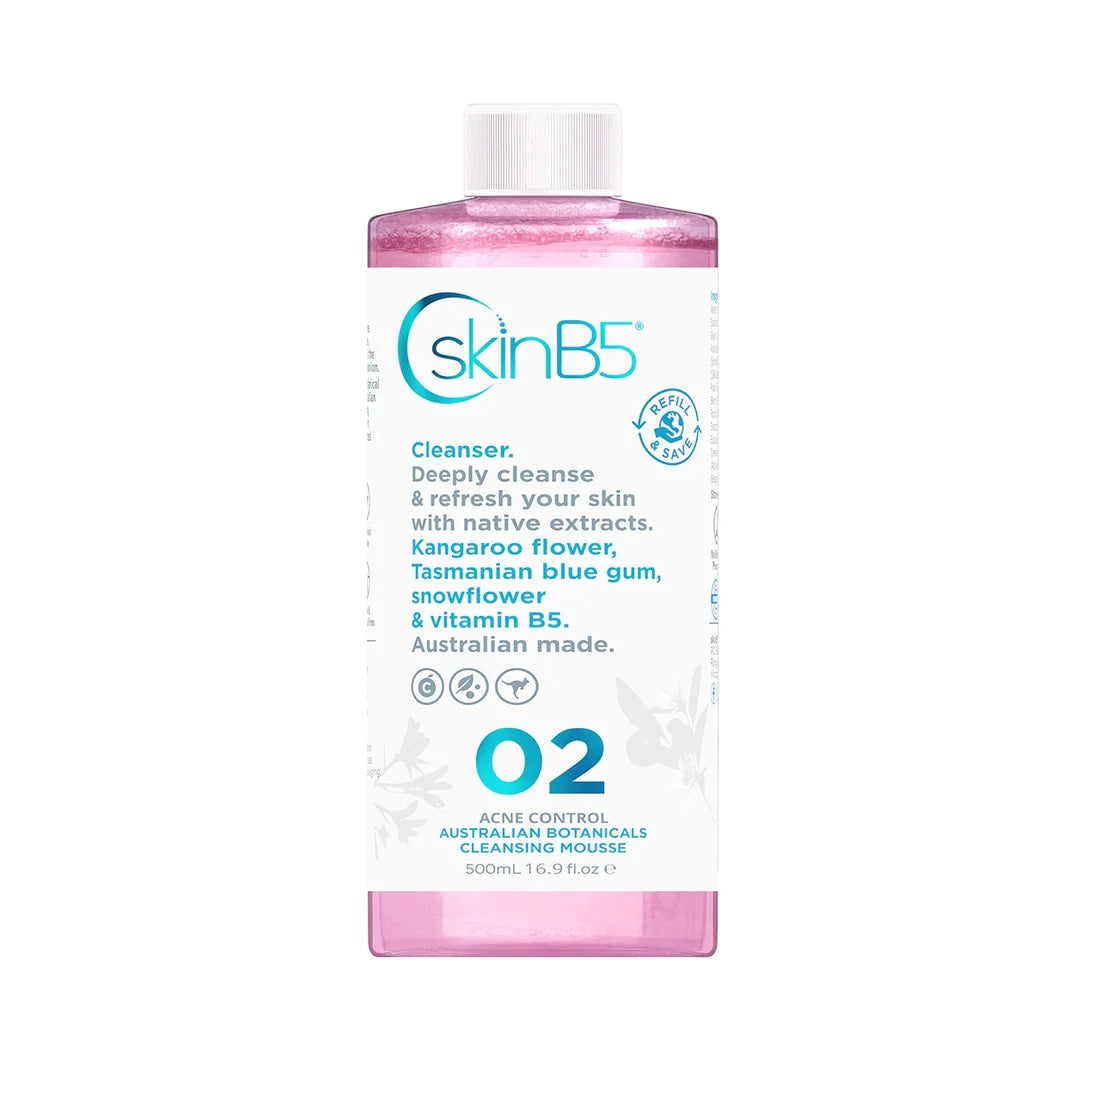 SkinB5 Acne Control Australian Botanicals Cleansing Mousse Refill